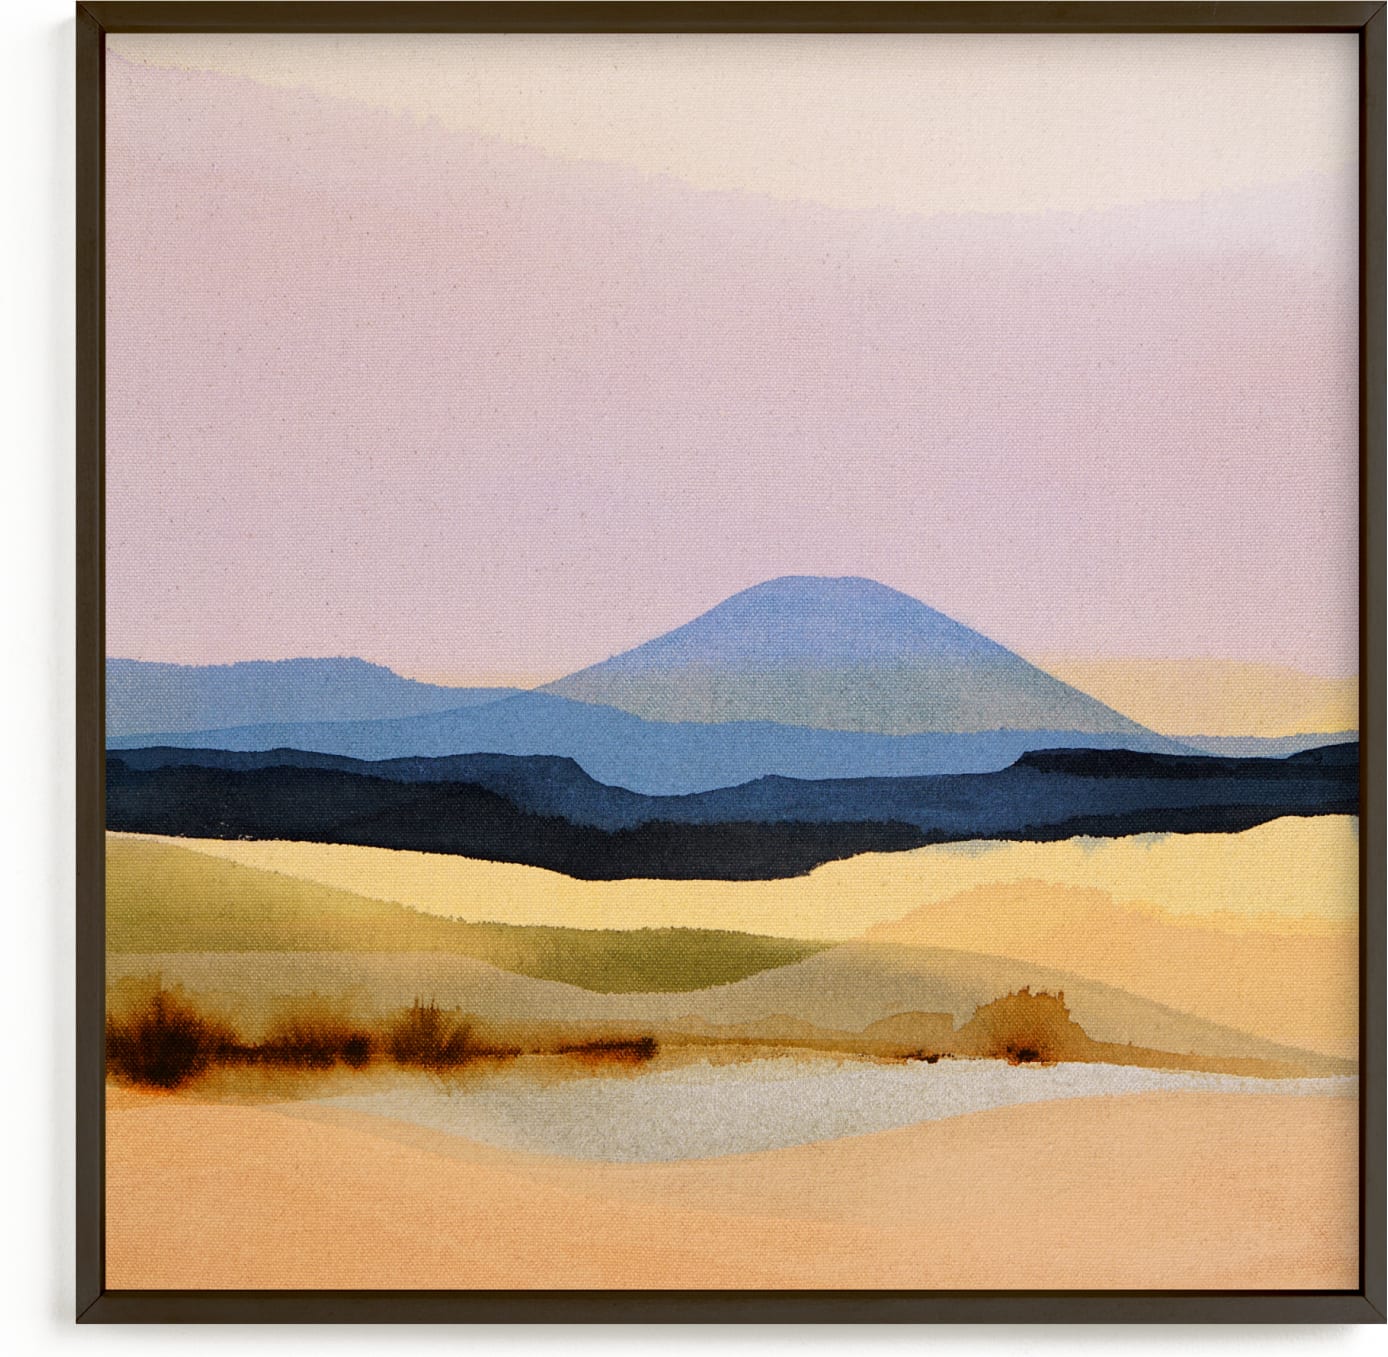 This is a brown art by Shina Choi called Violet Desert Breeze.